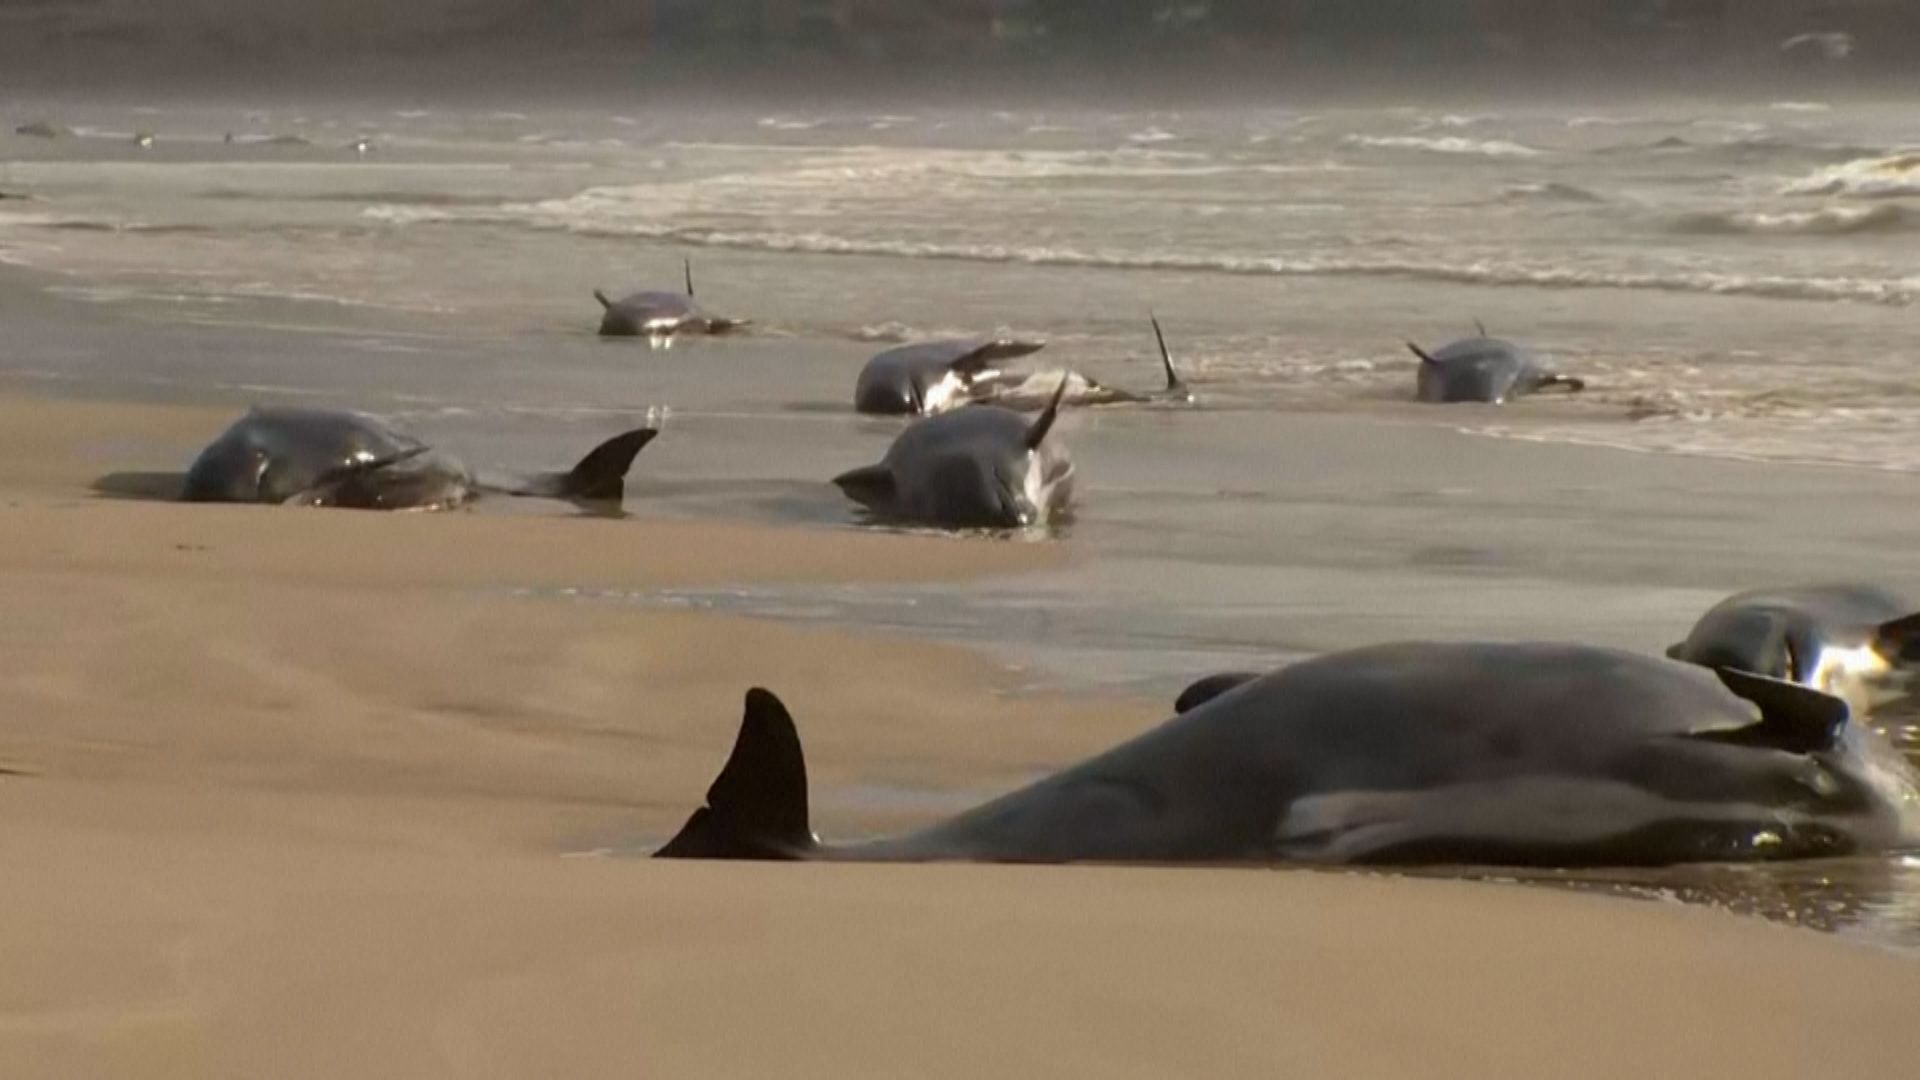 More Than 200 Whales Swim Away After New Zealand Stranding - WSJ